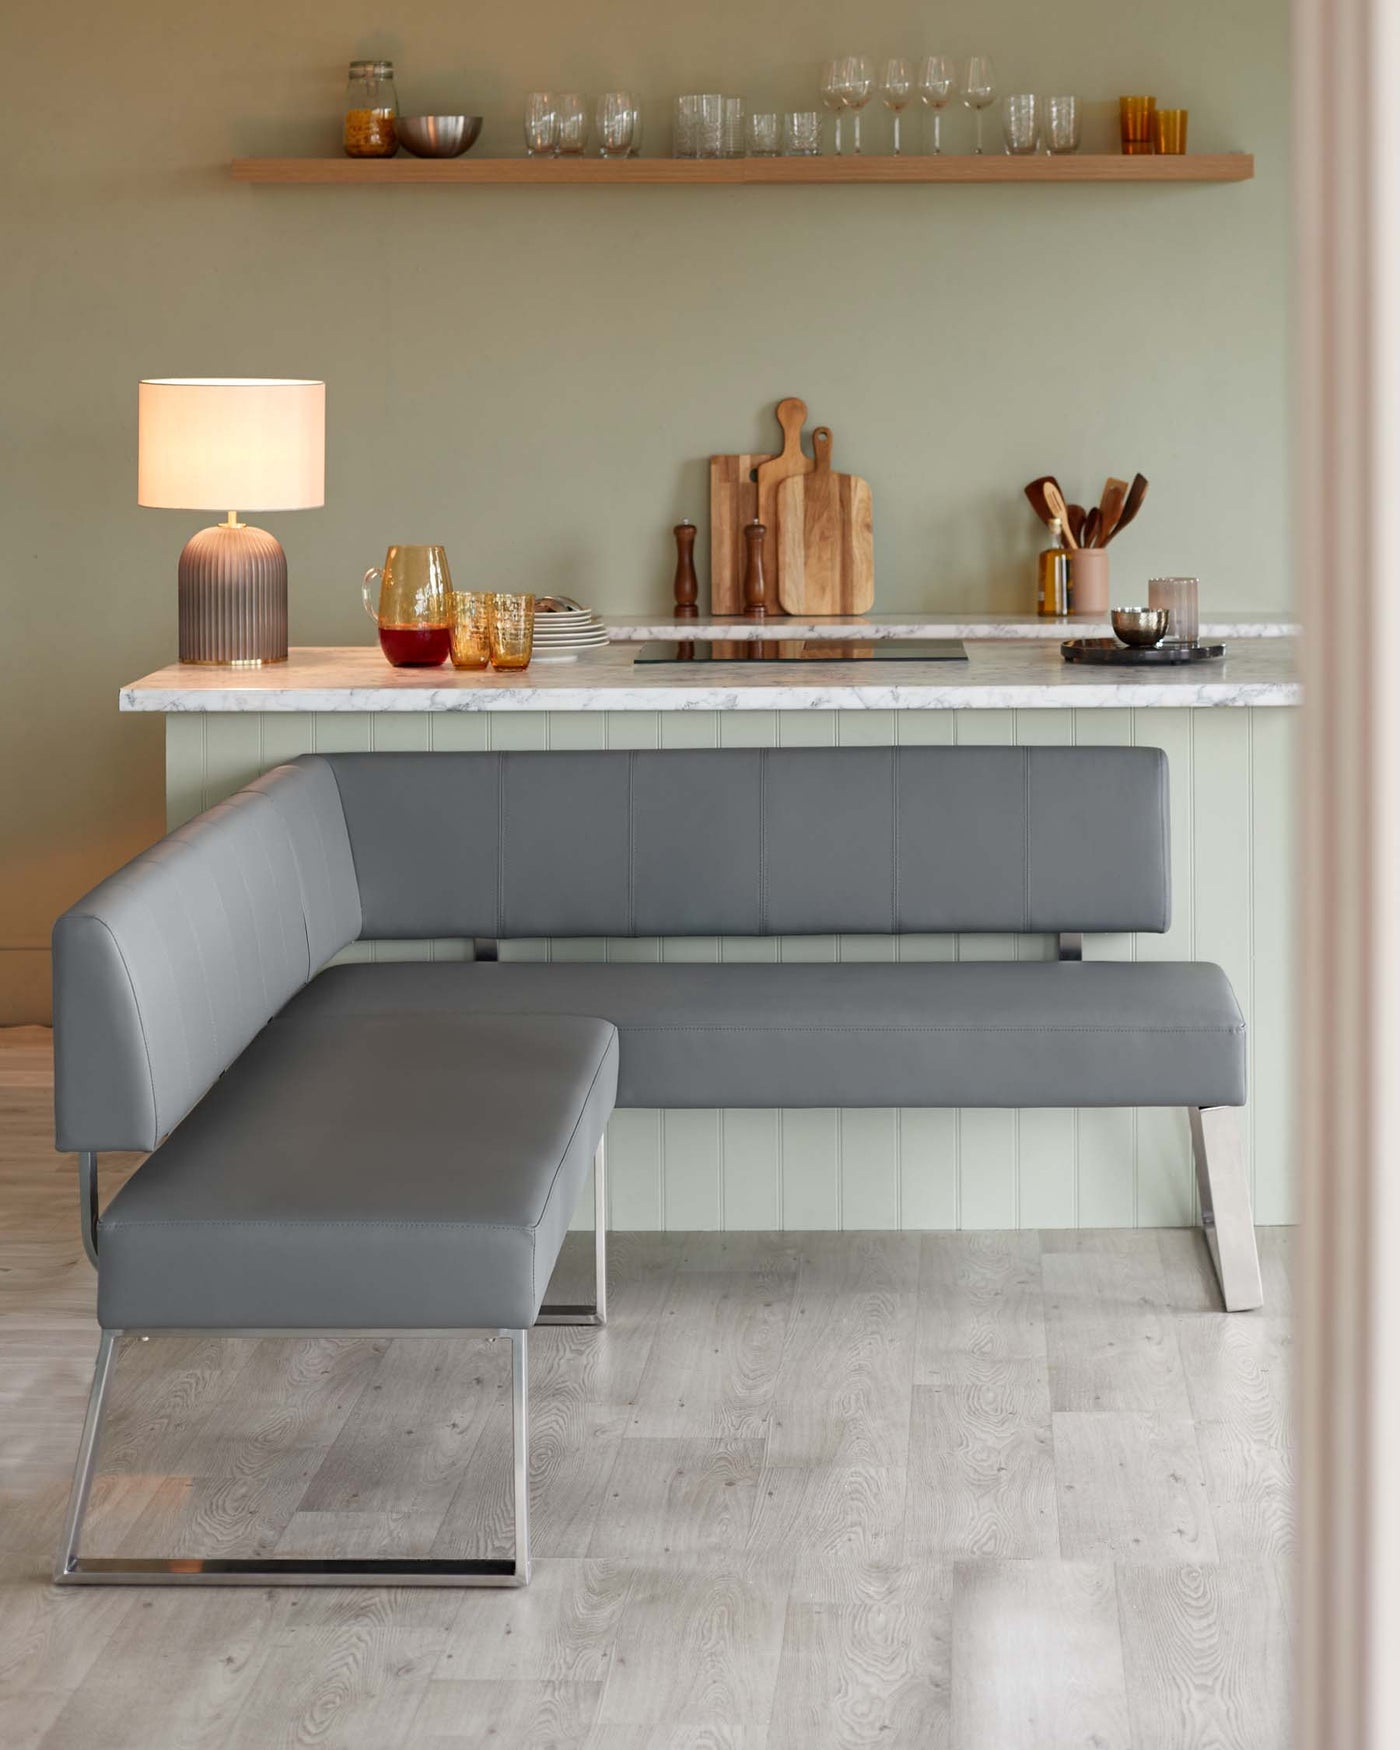 Modern minimalist kitchen seating furniture consisting of a sleek grey upholstered bench with clean lines and a matching single-seat ottoman, both featuring chrome metal bases.